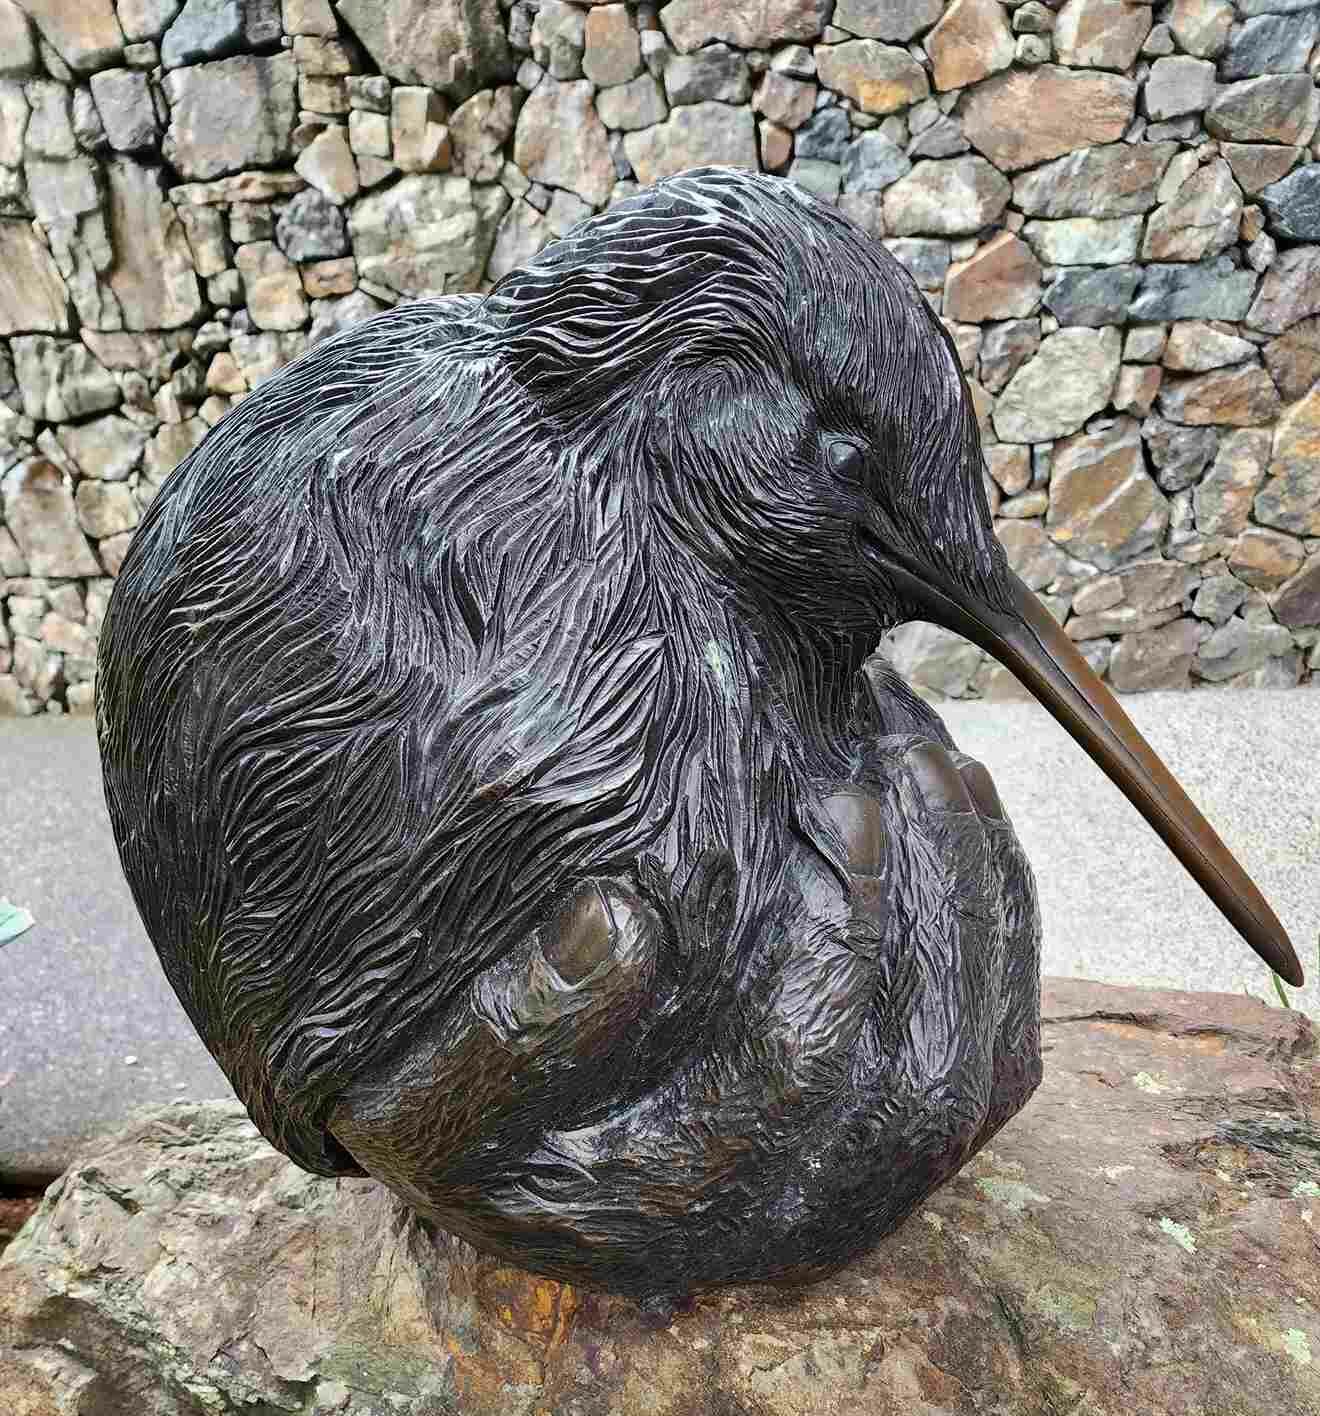 Sculpture Hand protecting baby kiwi chick by Susan Dinkelacker outside the Whangarei Quarry Gardens at the Quail Cafe entrance